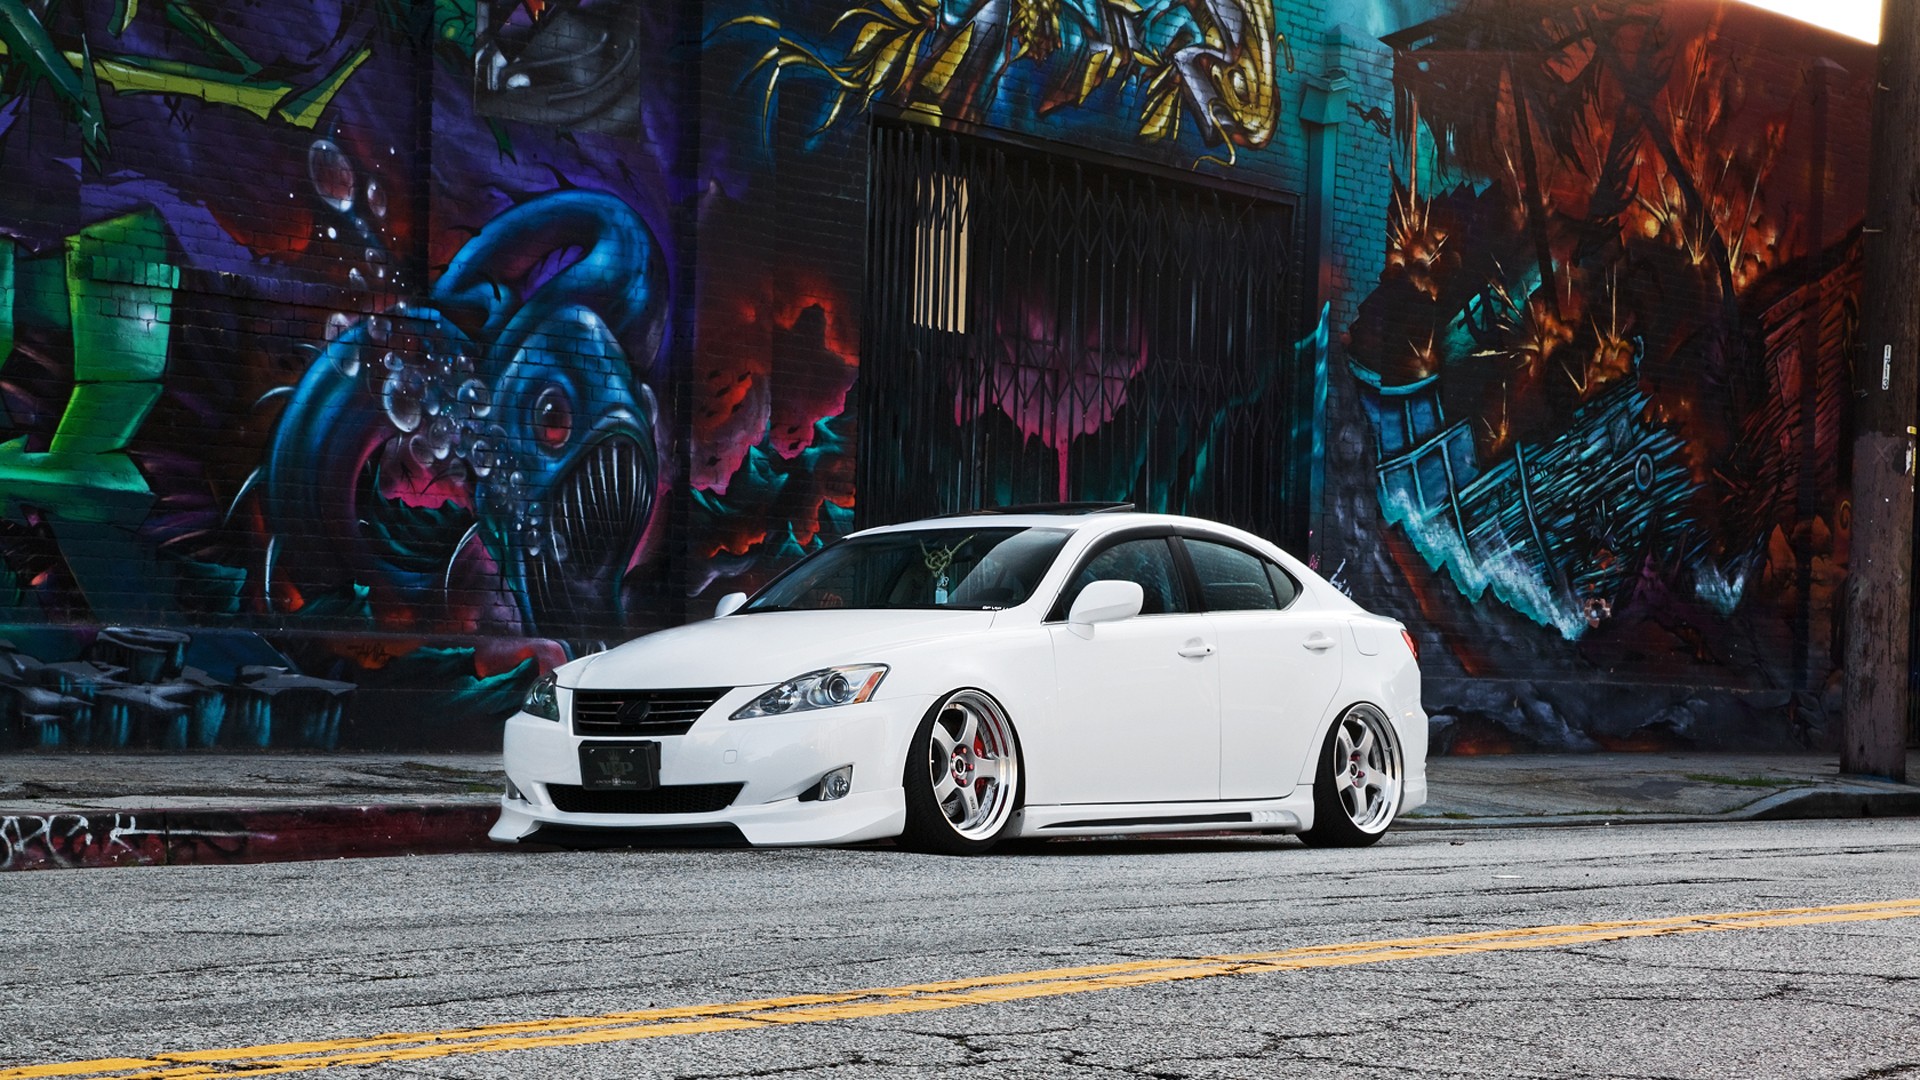 Cars Graffiti Roads Tuning Tuned Stance Lexus Is Wallpapers Hd Desktop And Mobile Backgrounds